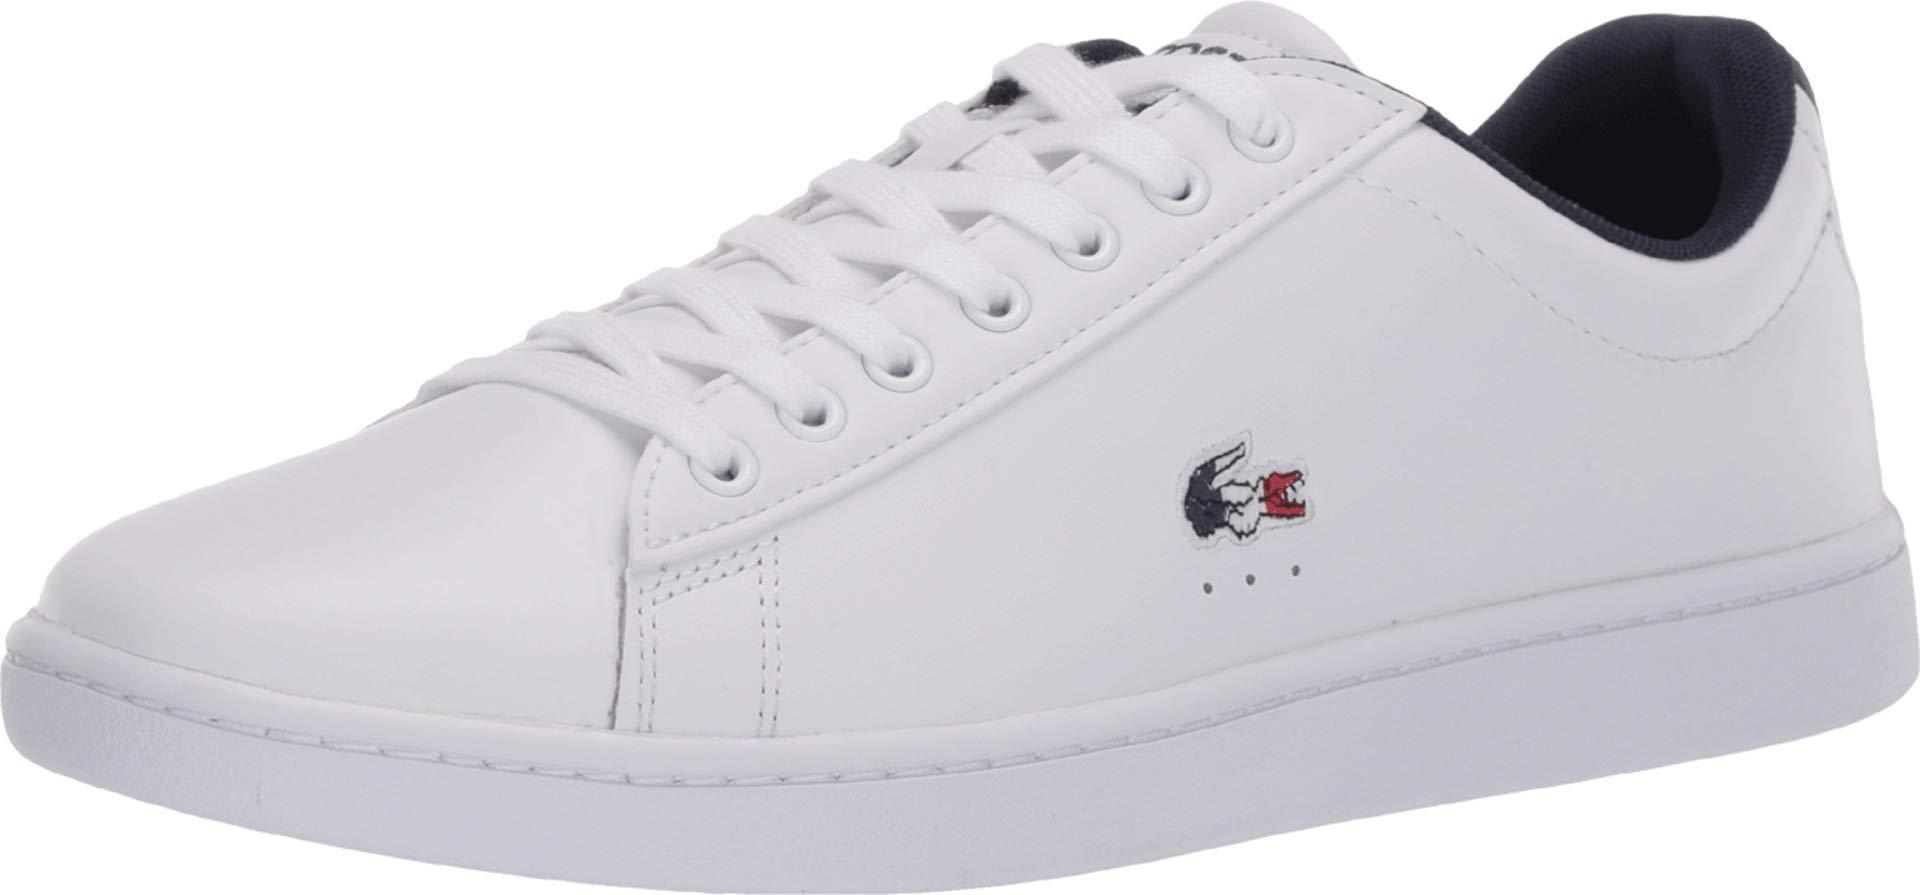 Lacoste Leather Carnaby Evo Tri 1 | Lyst